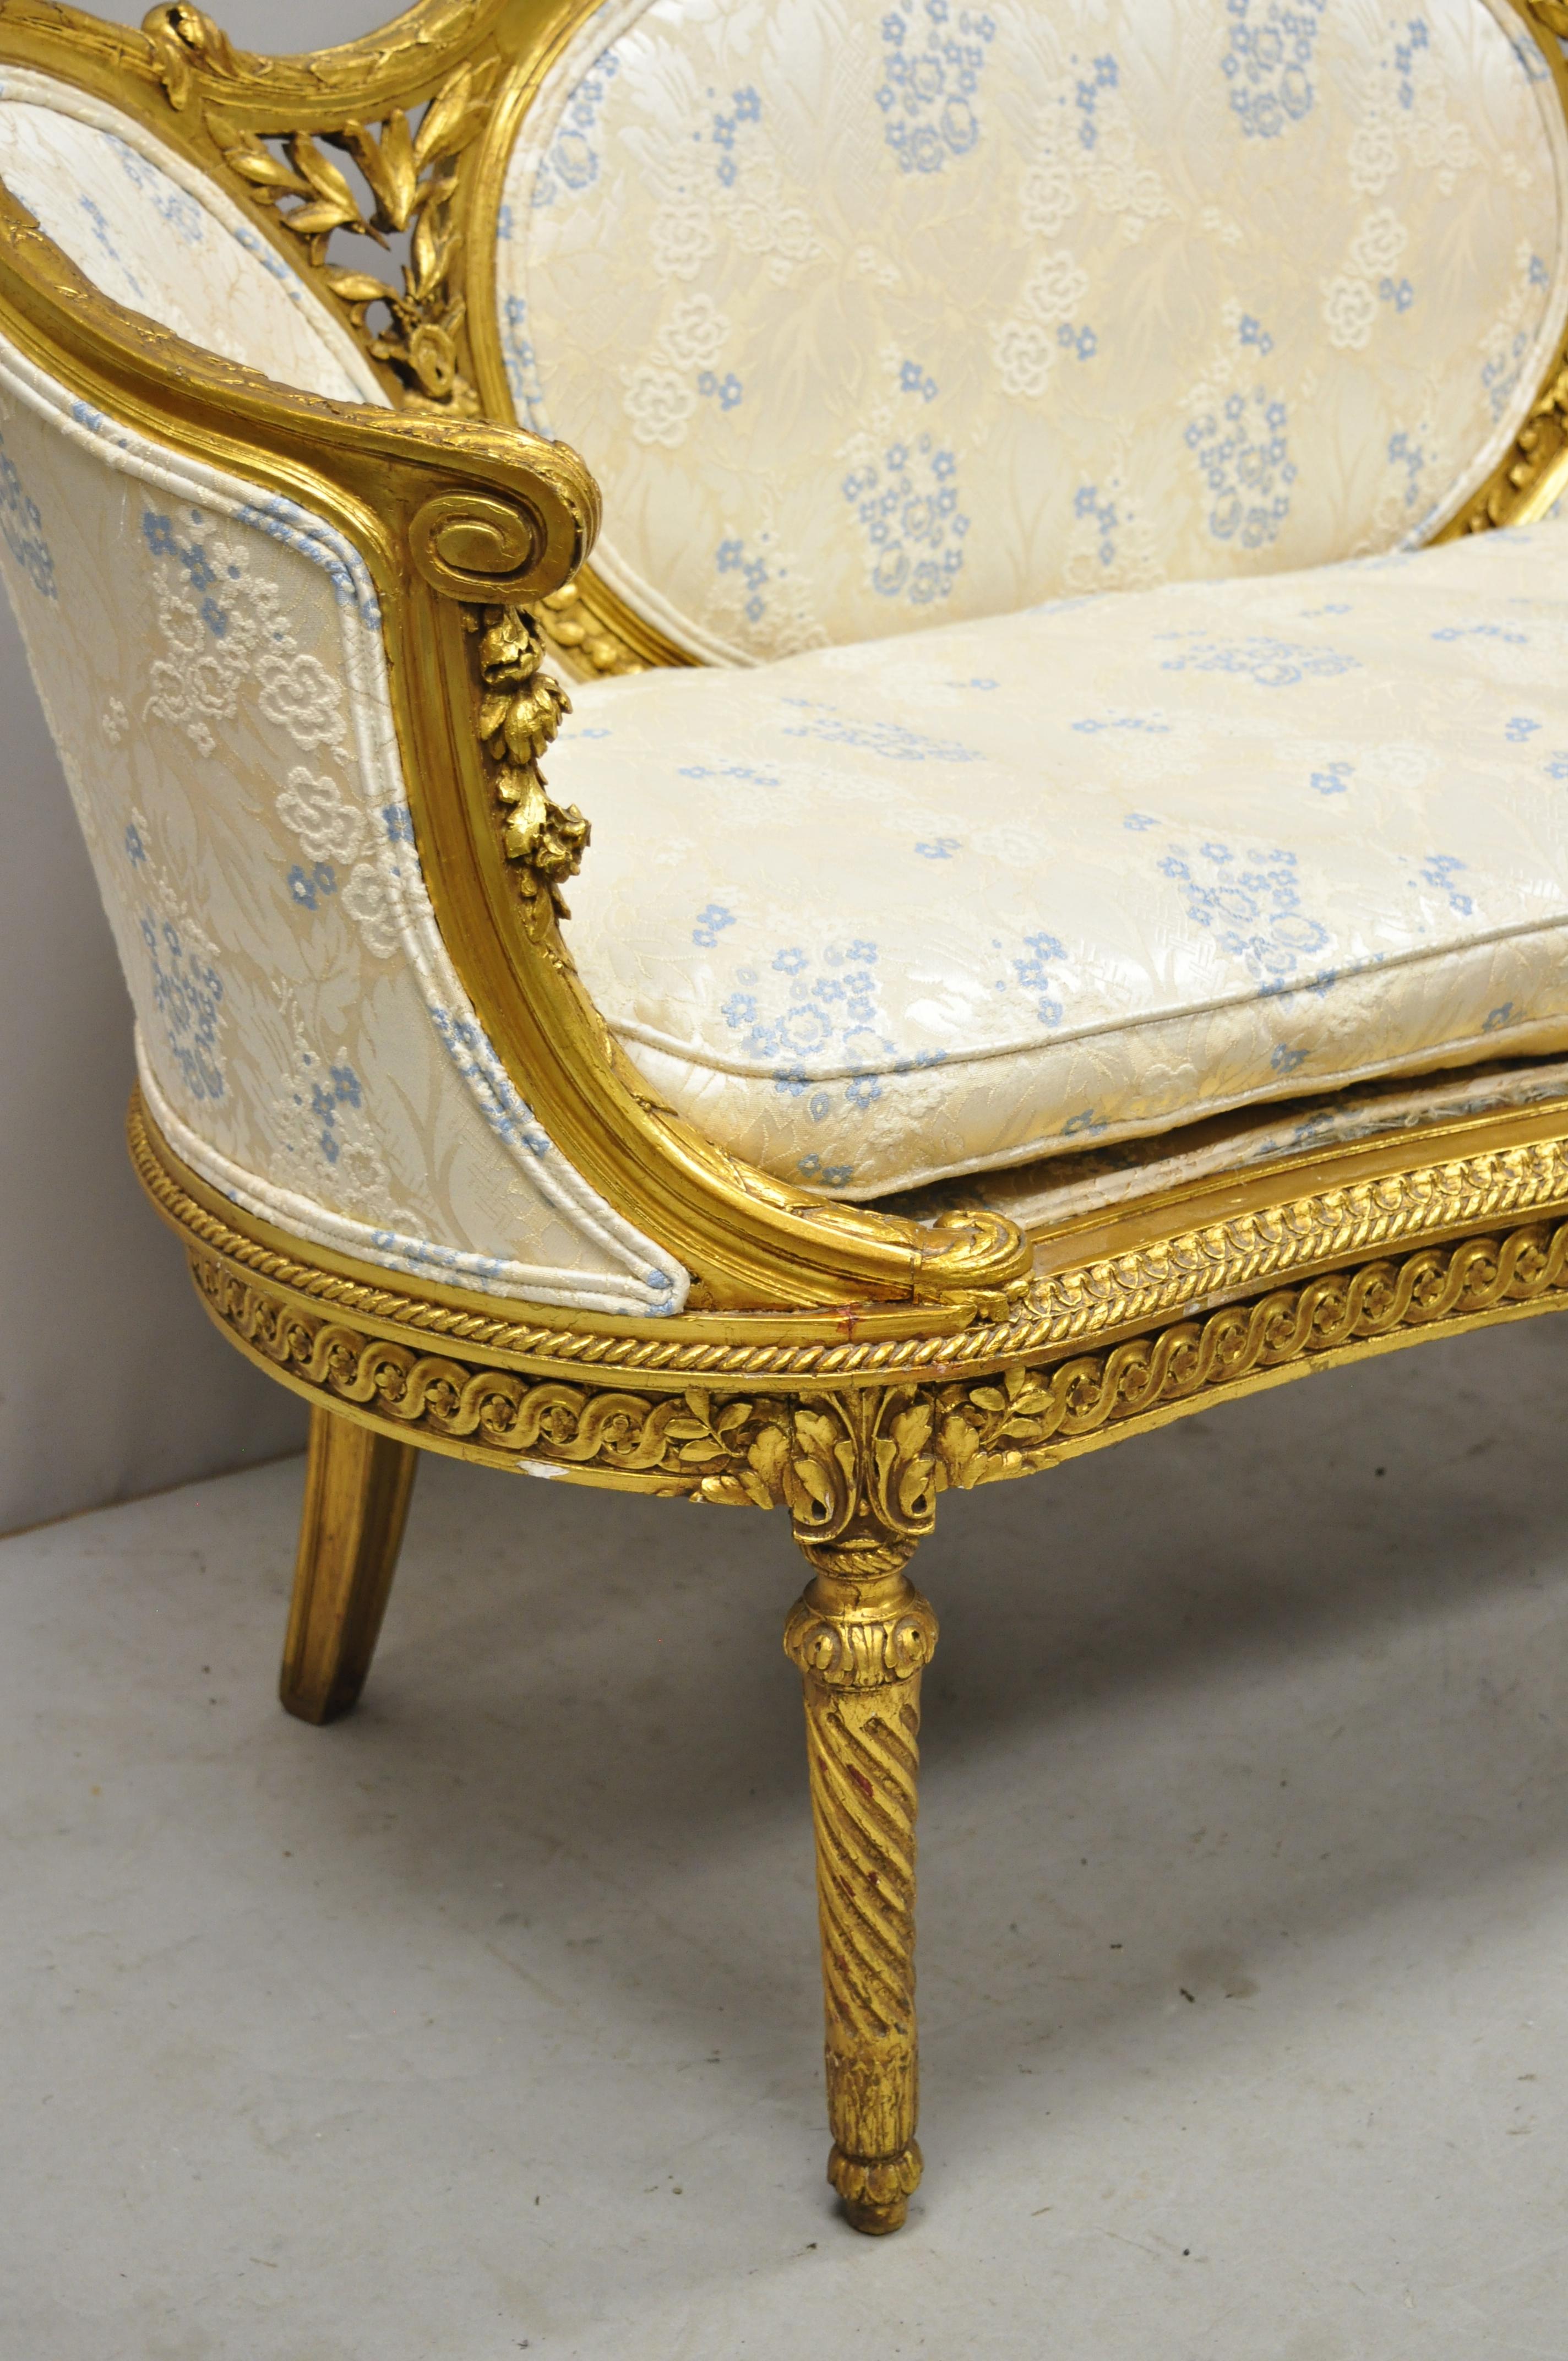 20th Century Antique French Louis XVI Style Victorian Gold Giltwood Petite Loveseat Settee